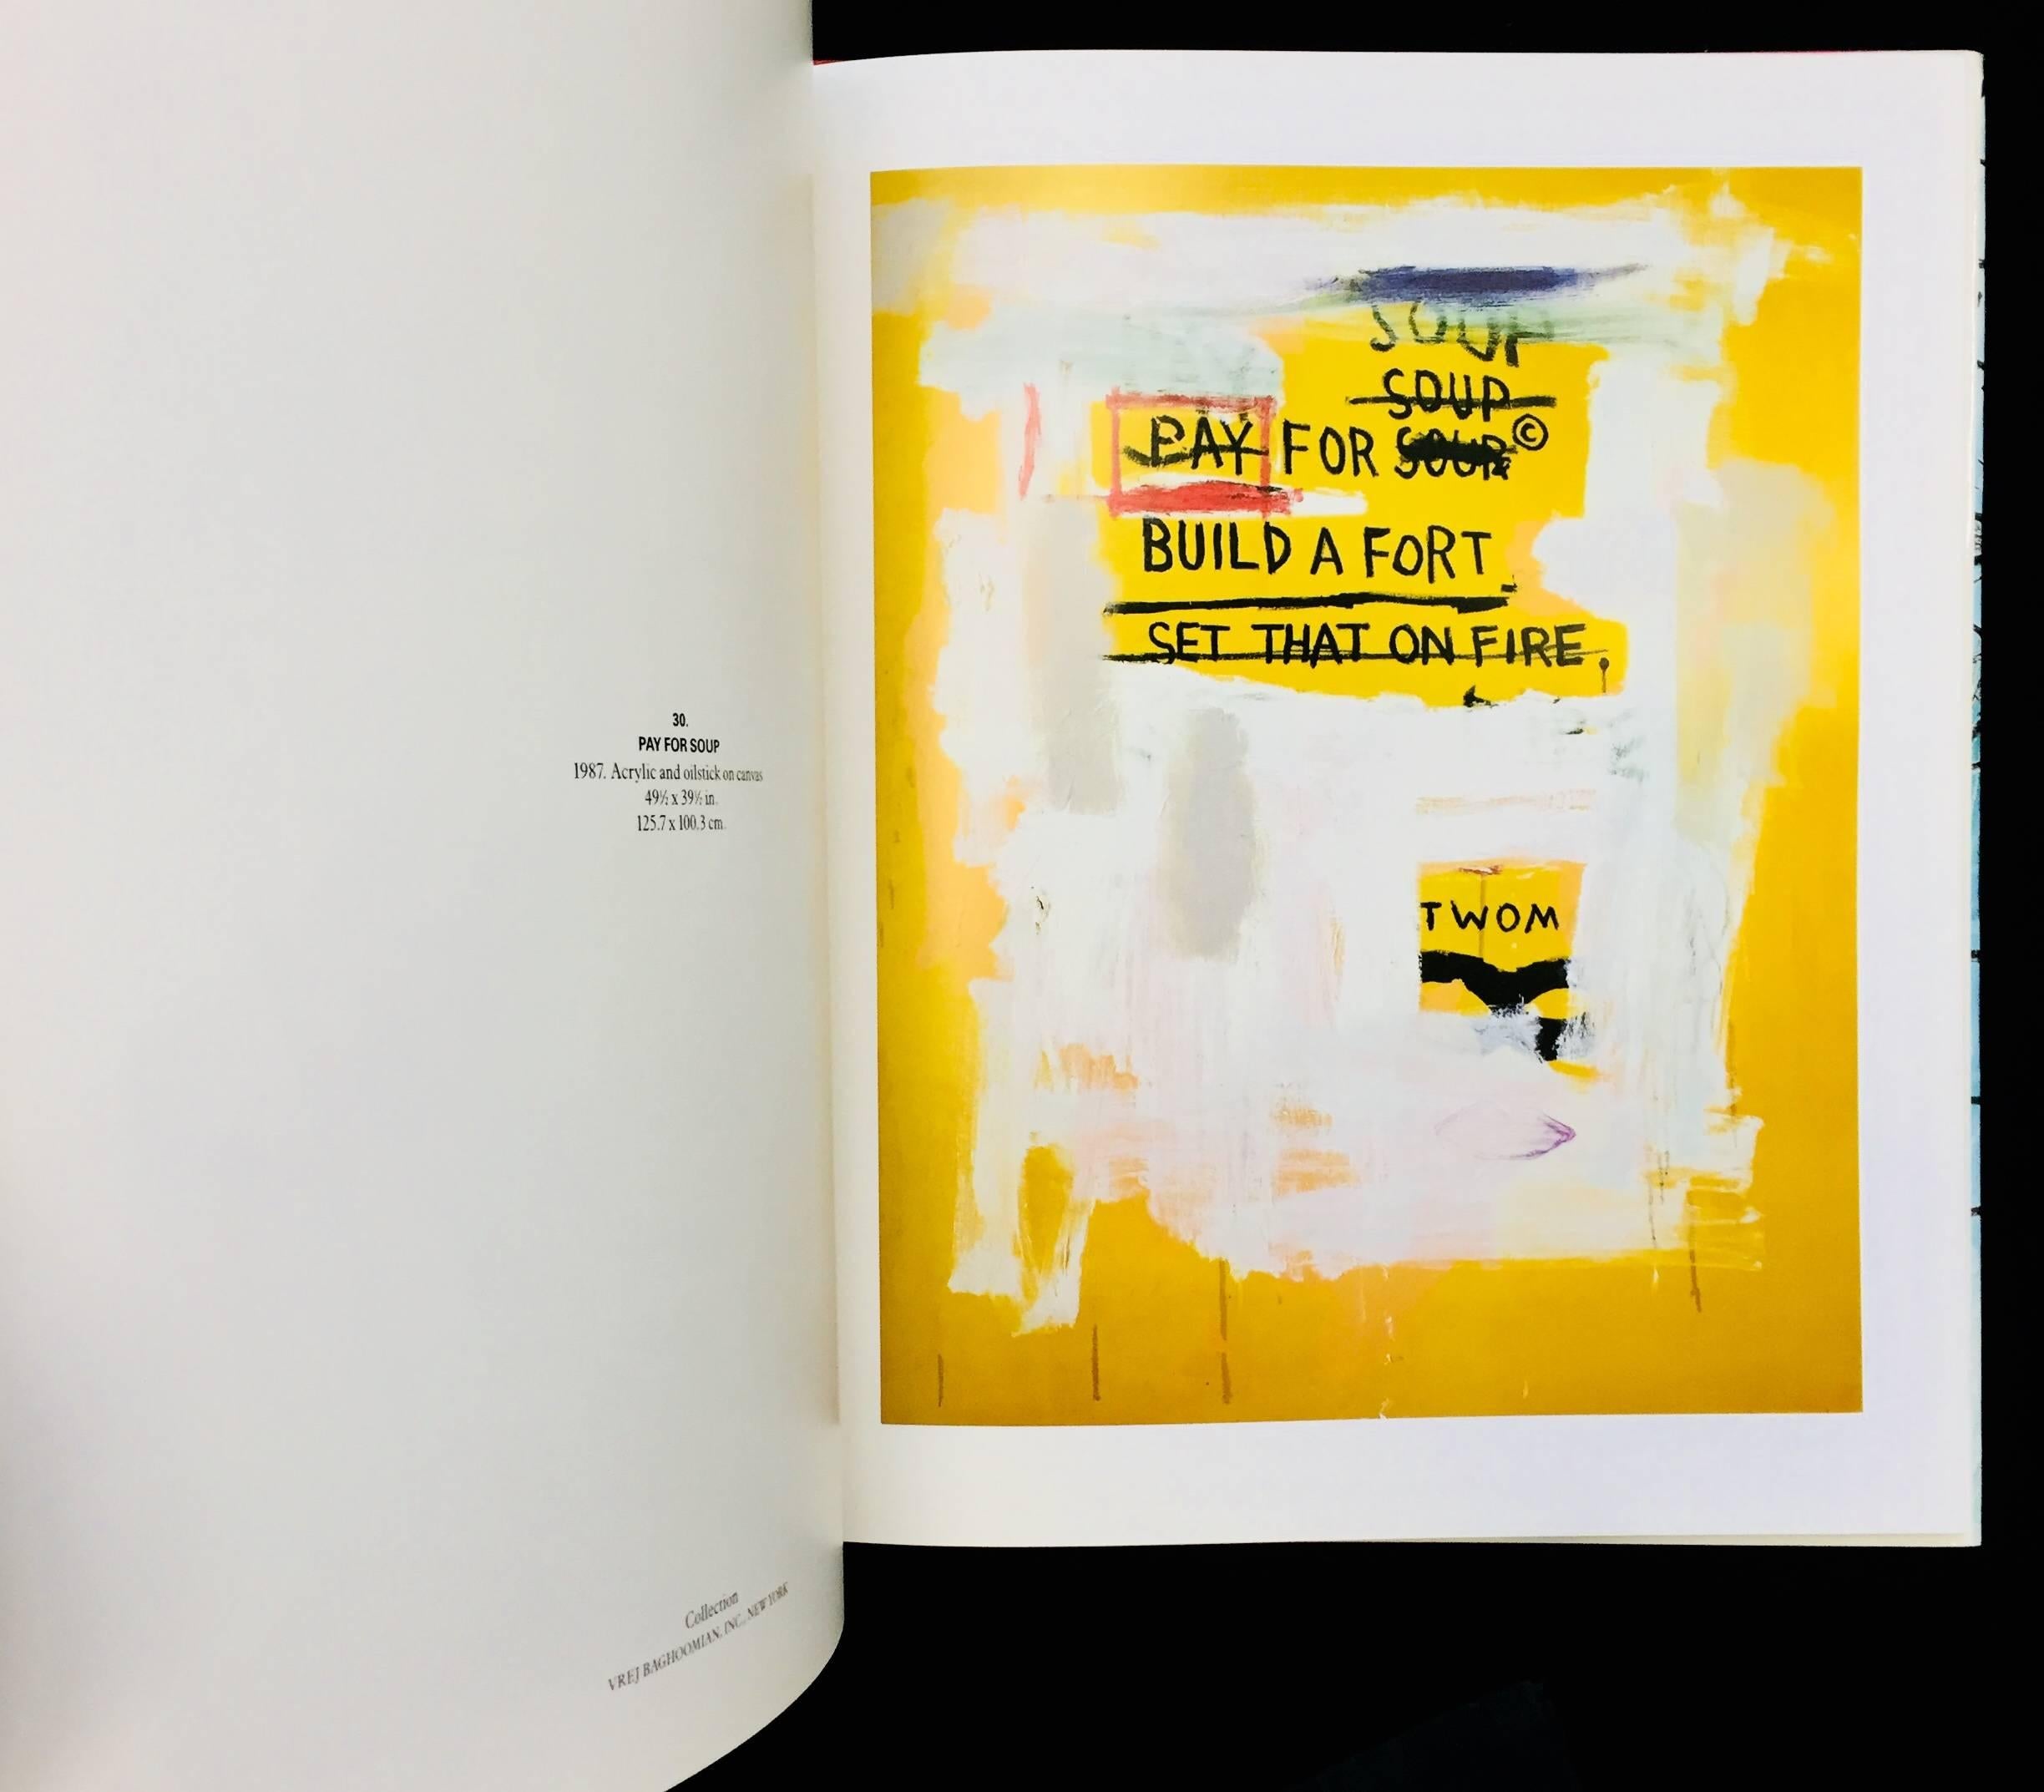 Jean-Michel Basquiat Vrej Baghoomian, 21 October to 25 November, 1989:

1st edition exhibition catalog, printed 1989. 
153 pages. Cloth binding with dust jacket. 10 x 12 inches.
Very good overall condition with only some minor signs of